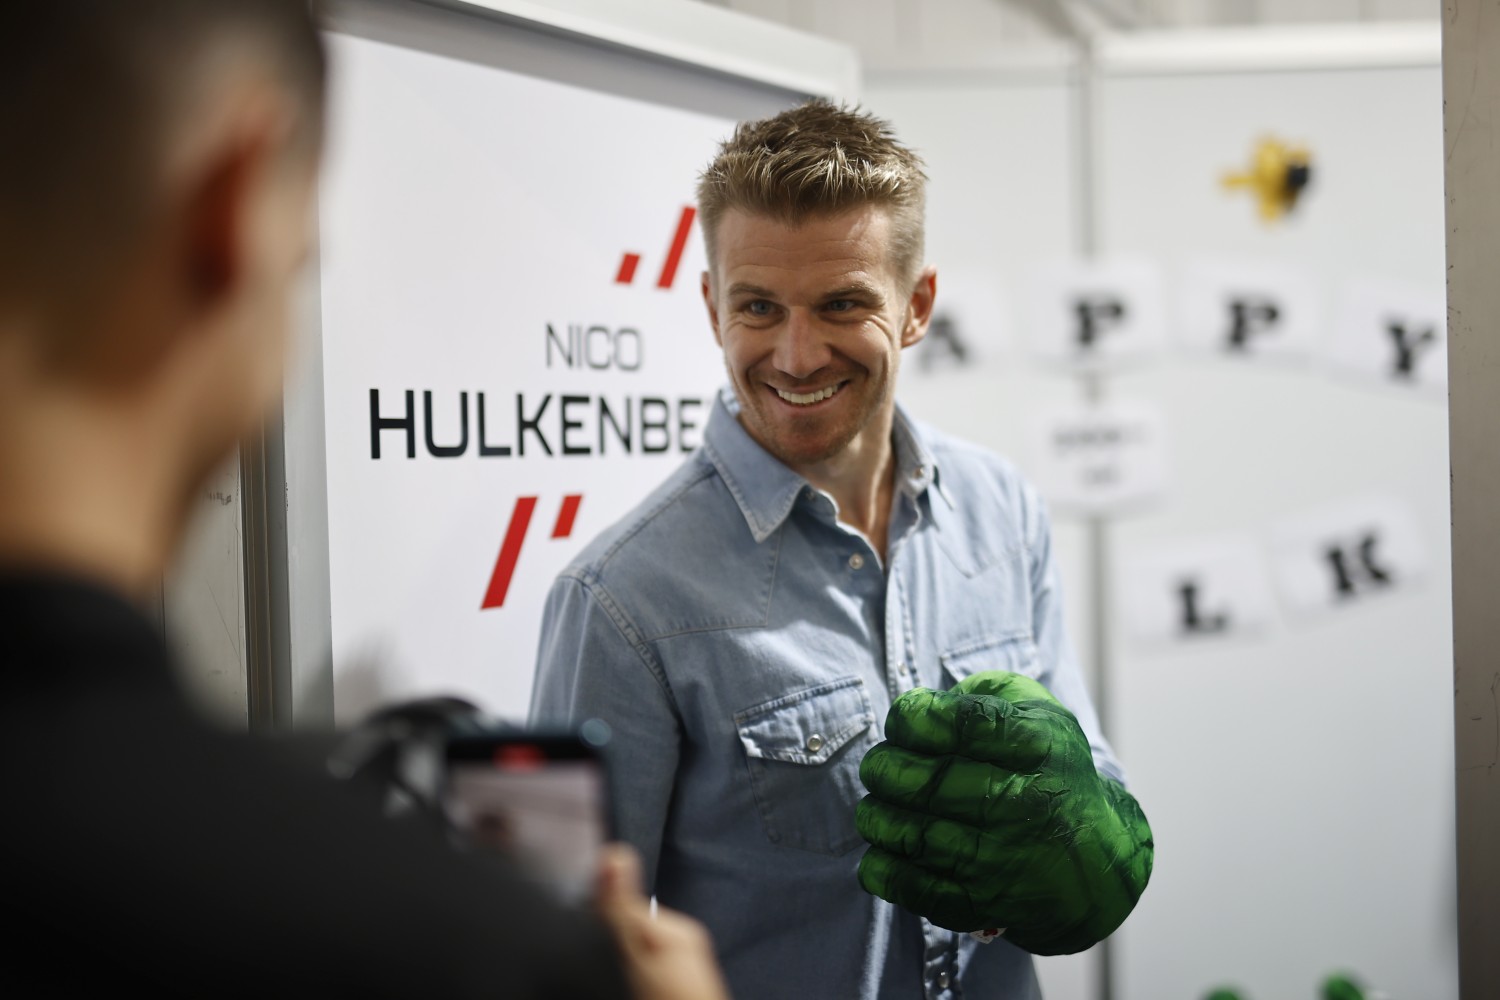 The Haas F1 team celebrate Nico Hulkenberg, Haas F1 Team's 200th race by filling his room with Incredible Hulk gloves during the Mexico City GP at Autodromo Hermanos Rodriguez on Thursday October 26, 2023 in Mexico City, Mexico. (Photo by Andy Hone / LAT Images)